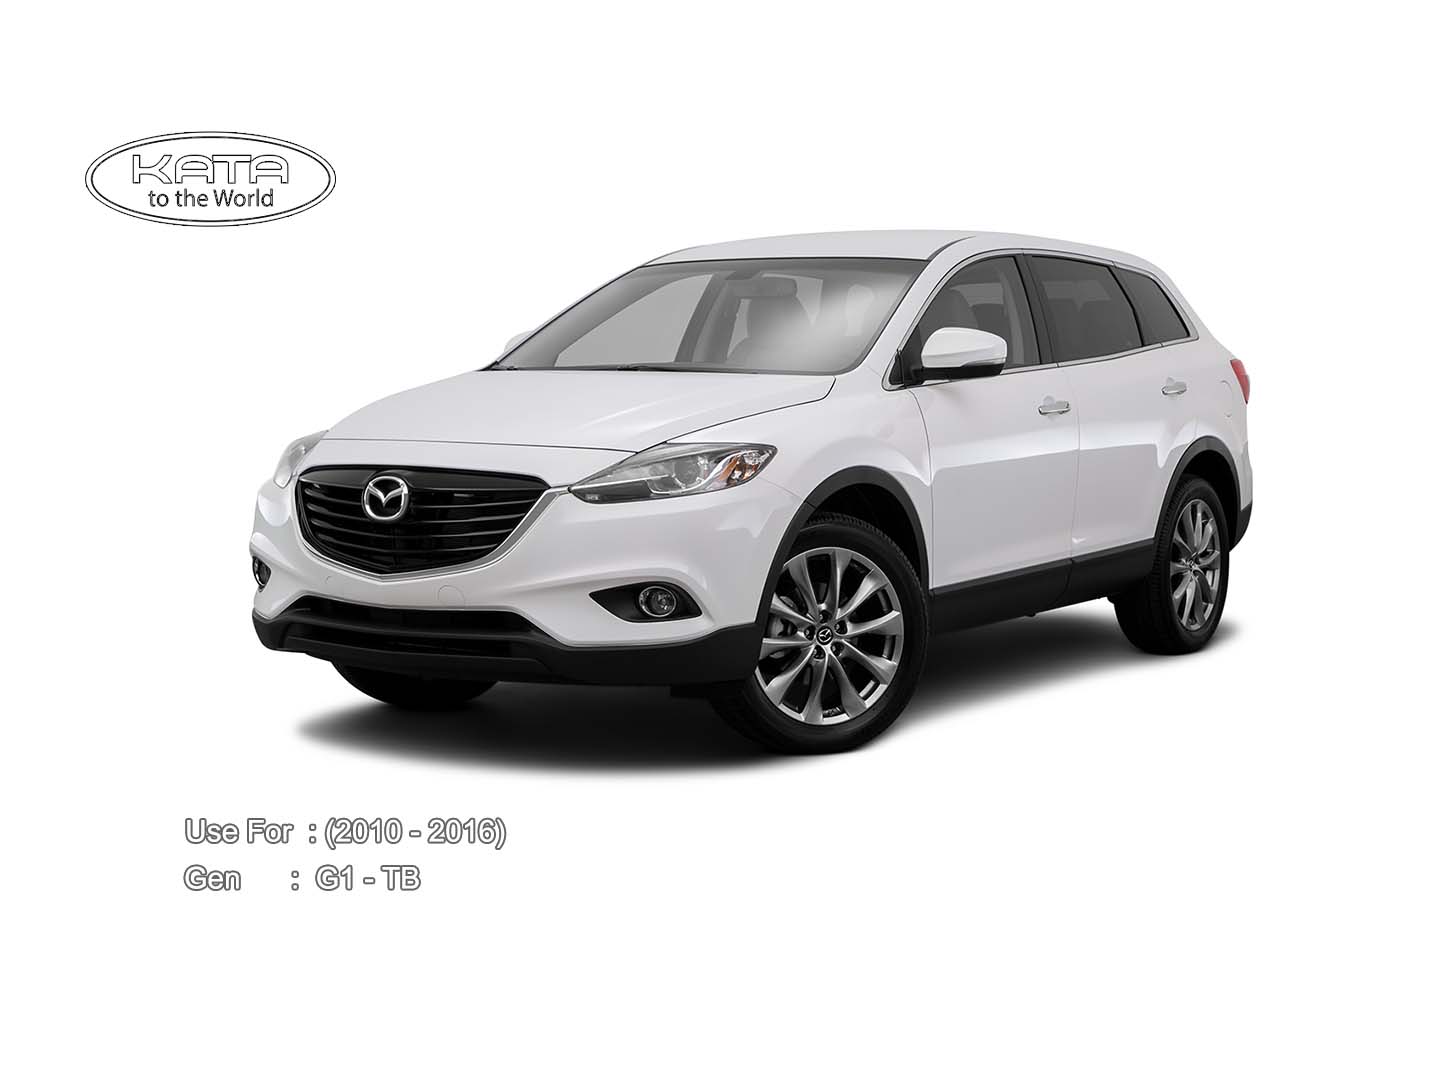 2015 Mazda CX9 features and options